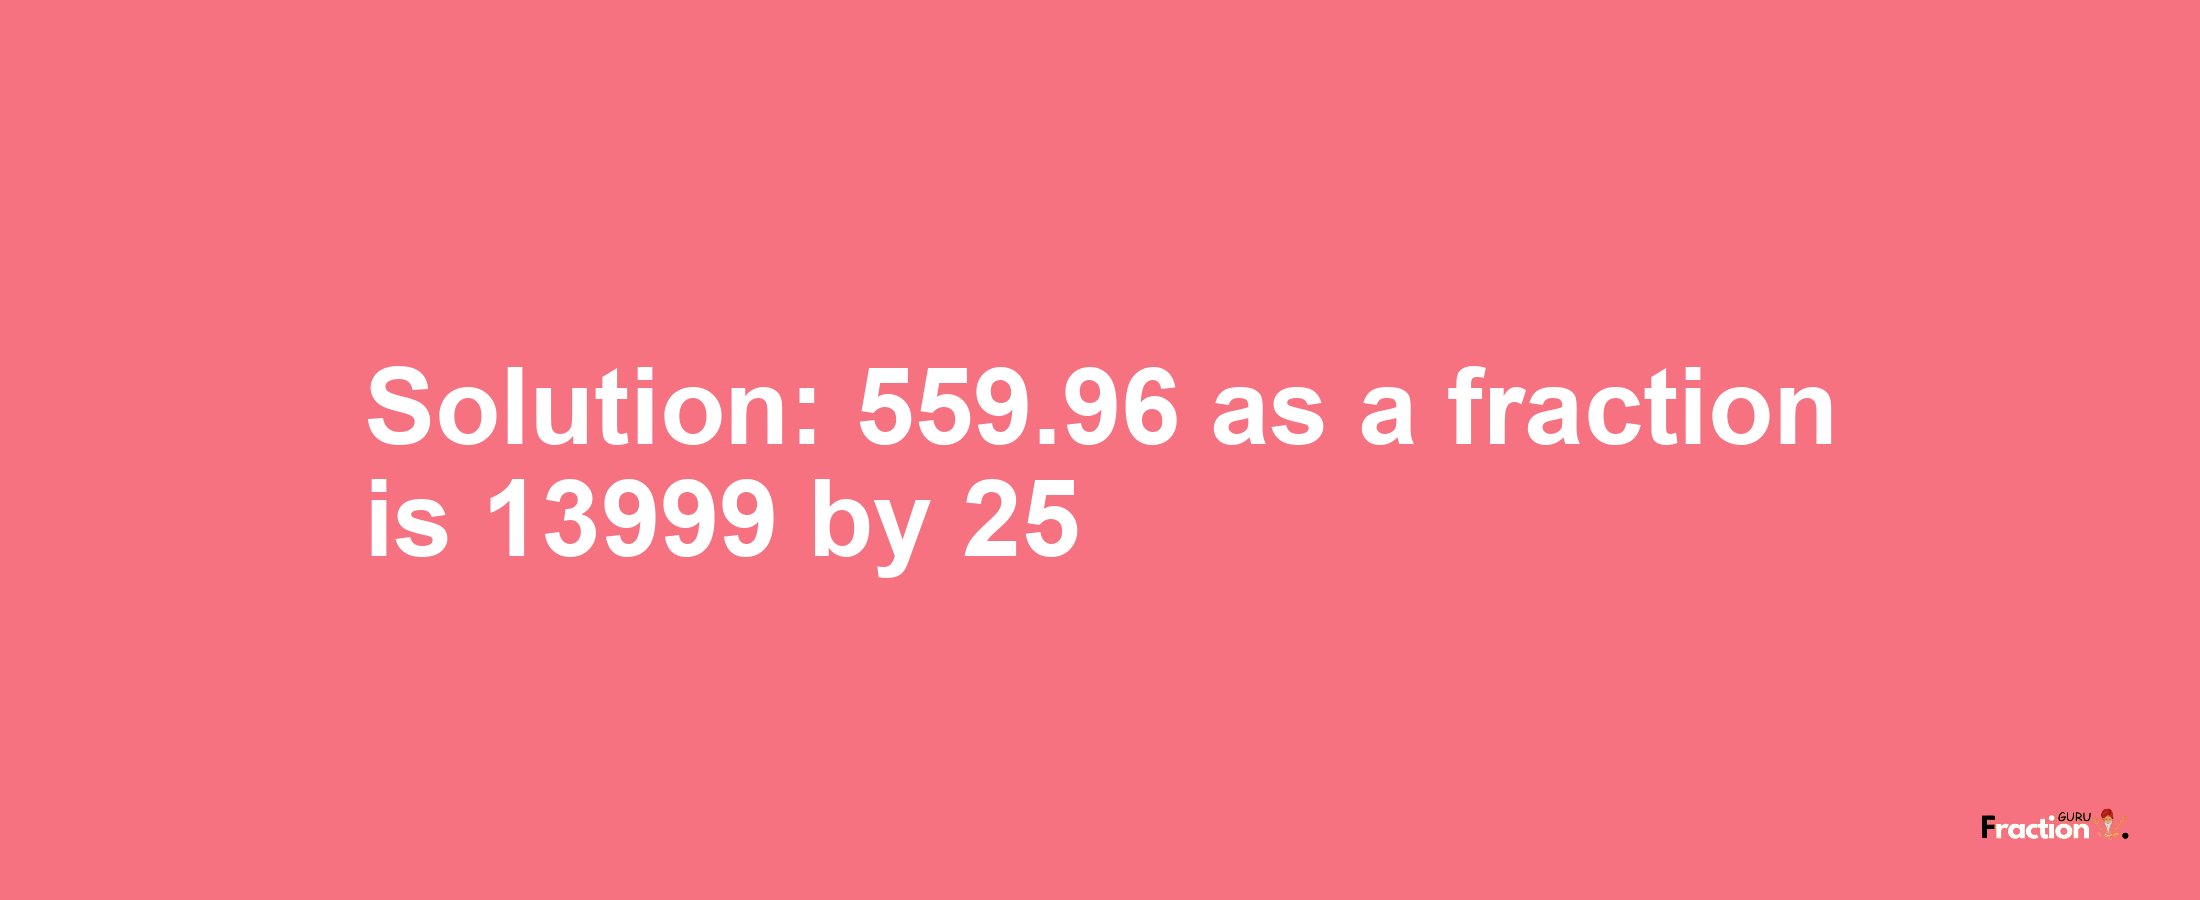 Solution:559.96 as a fraction is 13999/25